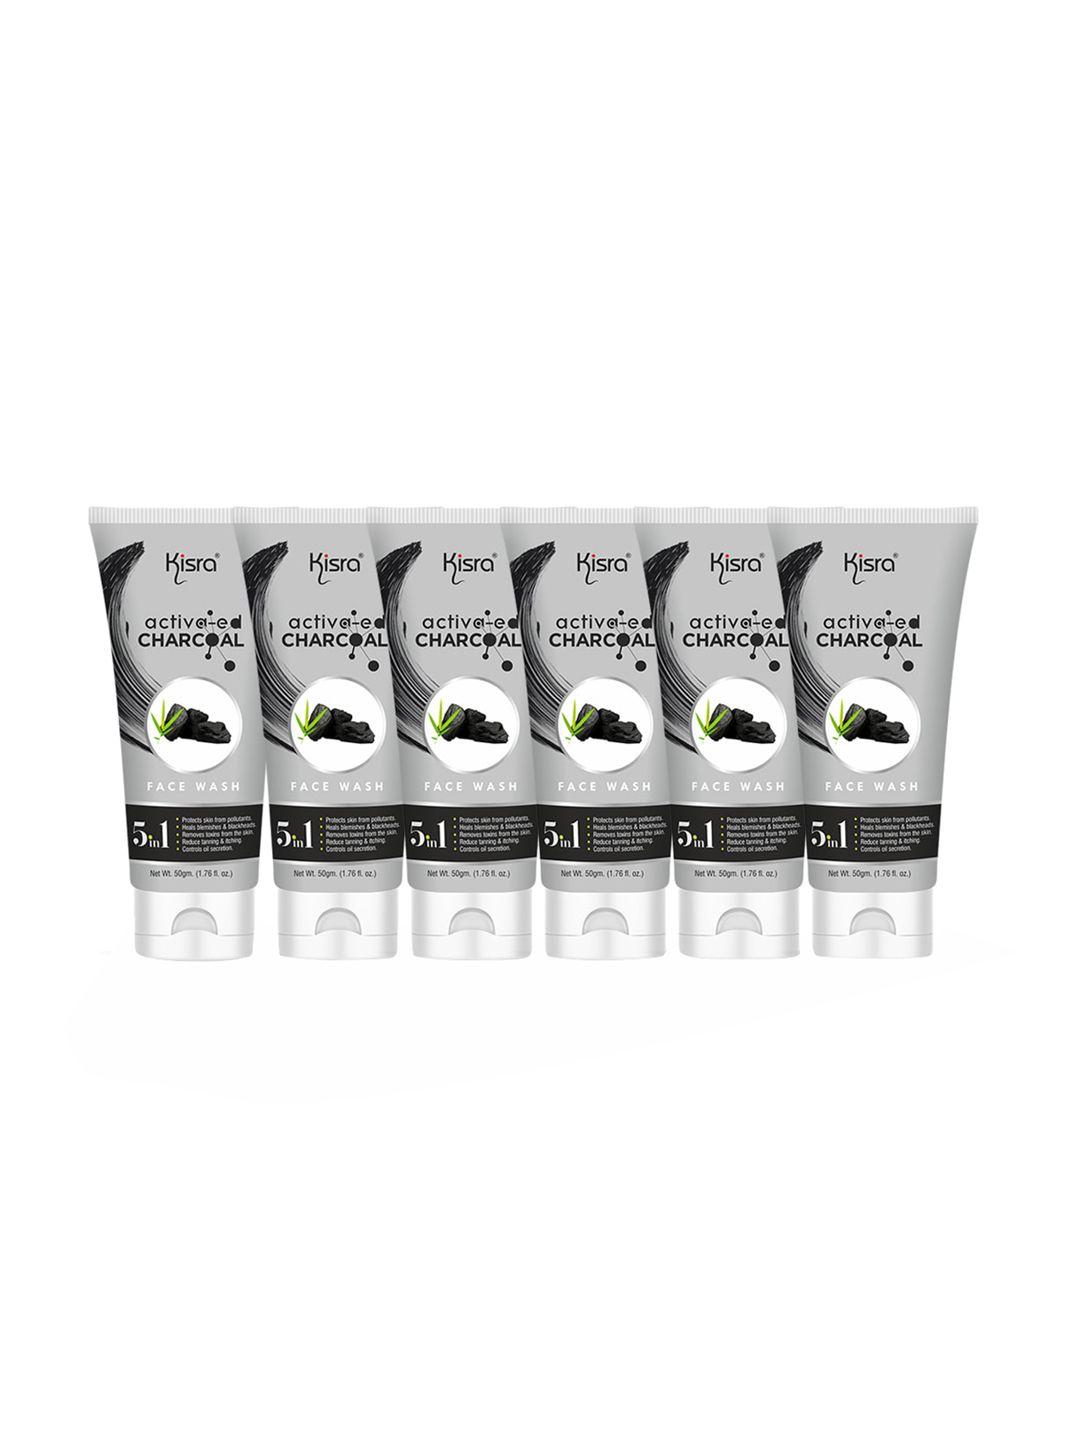 kisra set of 6 activated charcoal 5 in 1 deep pore cleaning face wash - 50g each